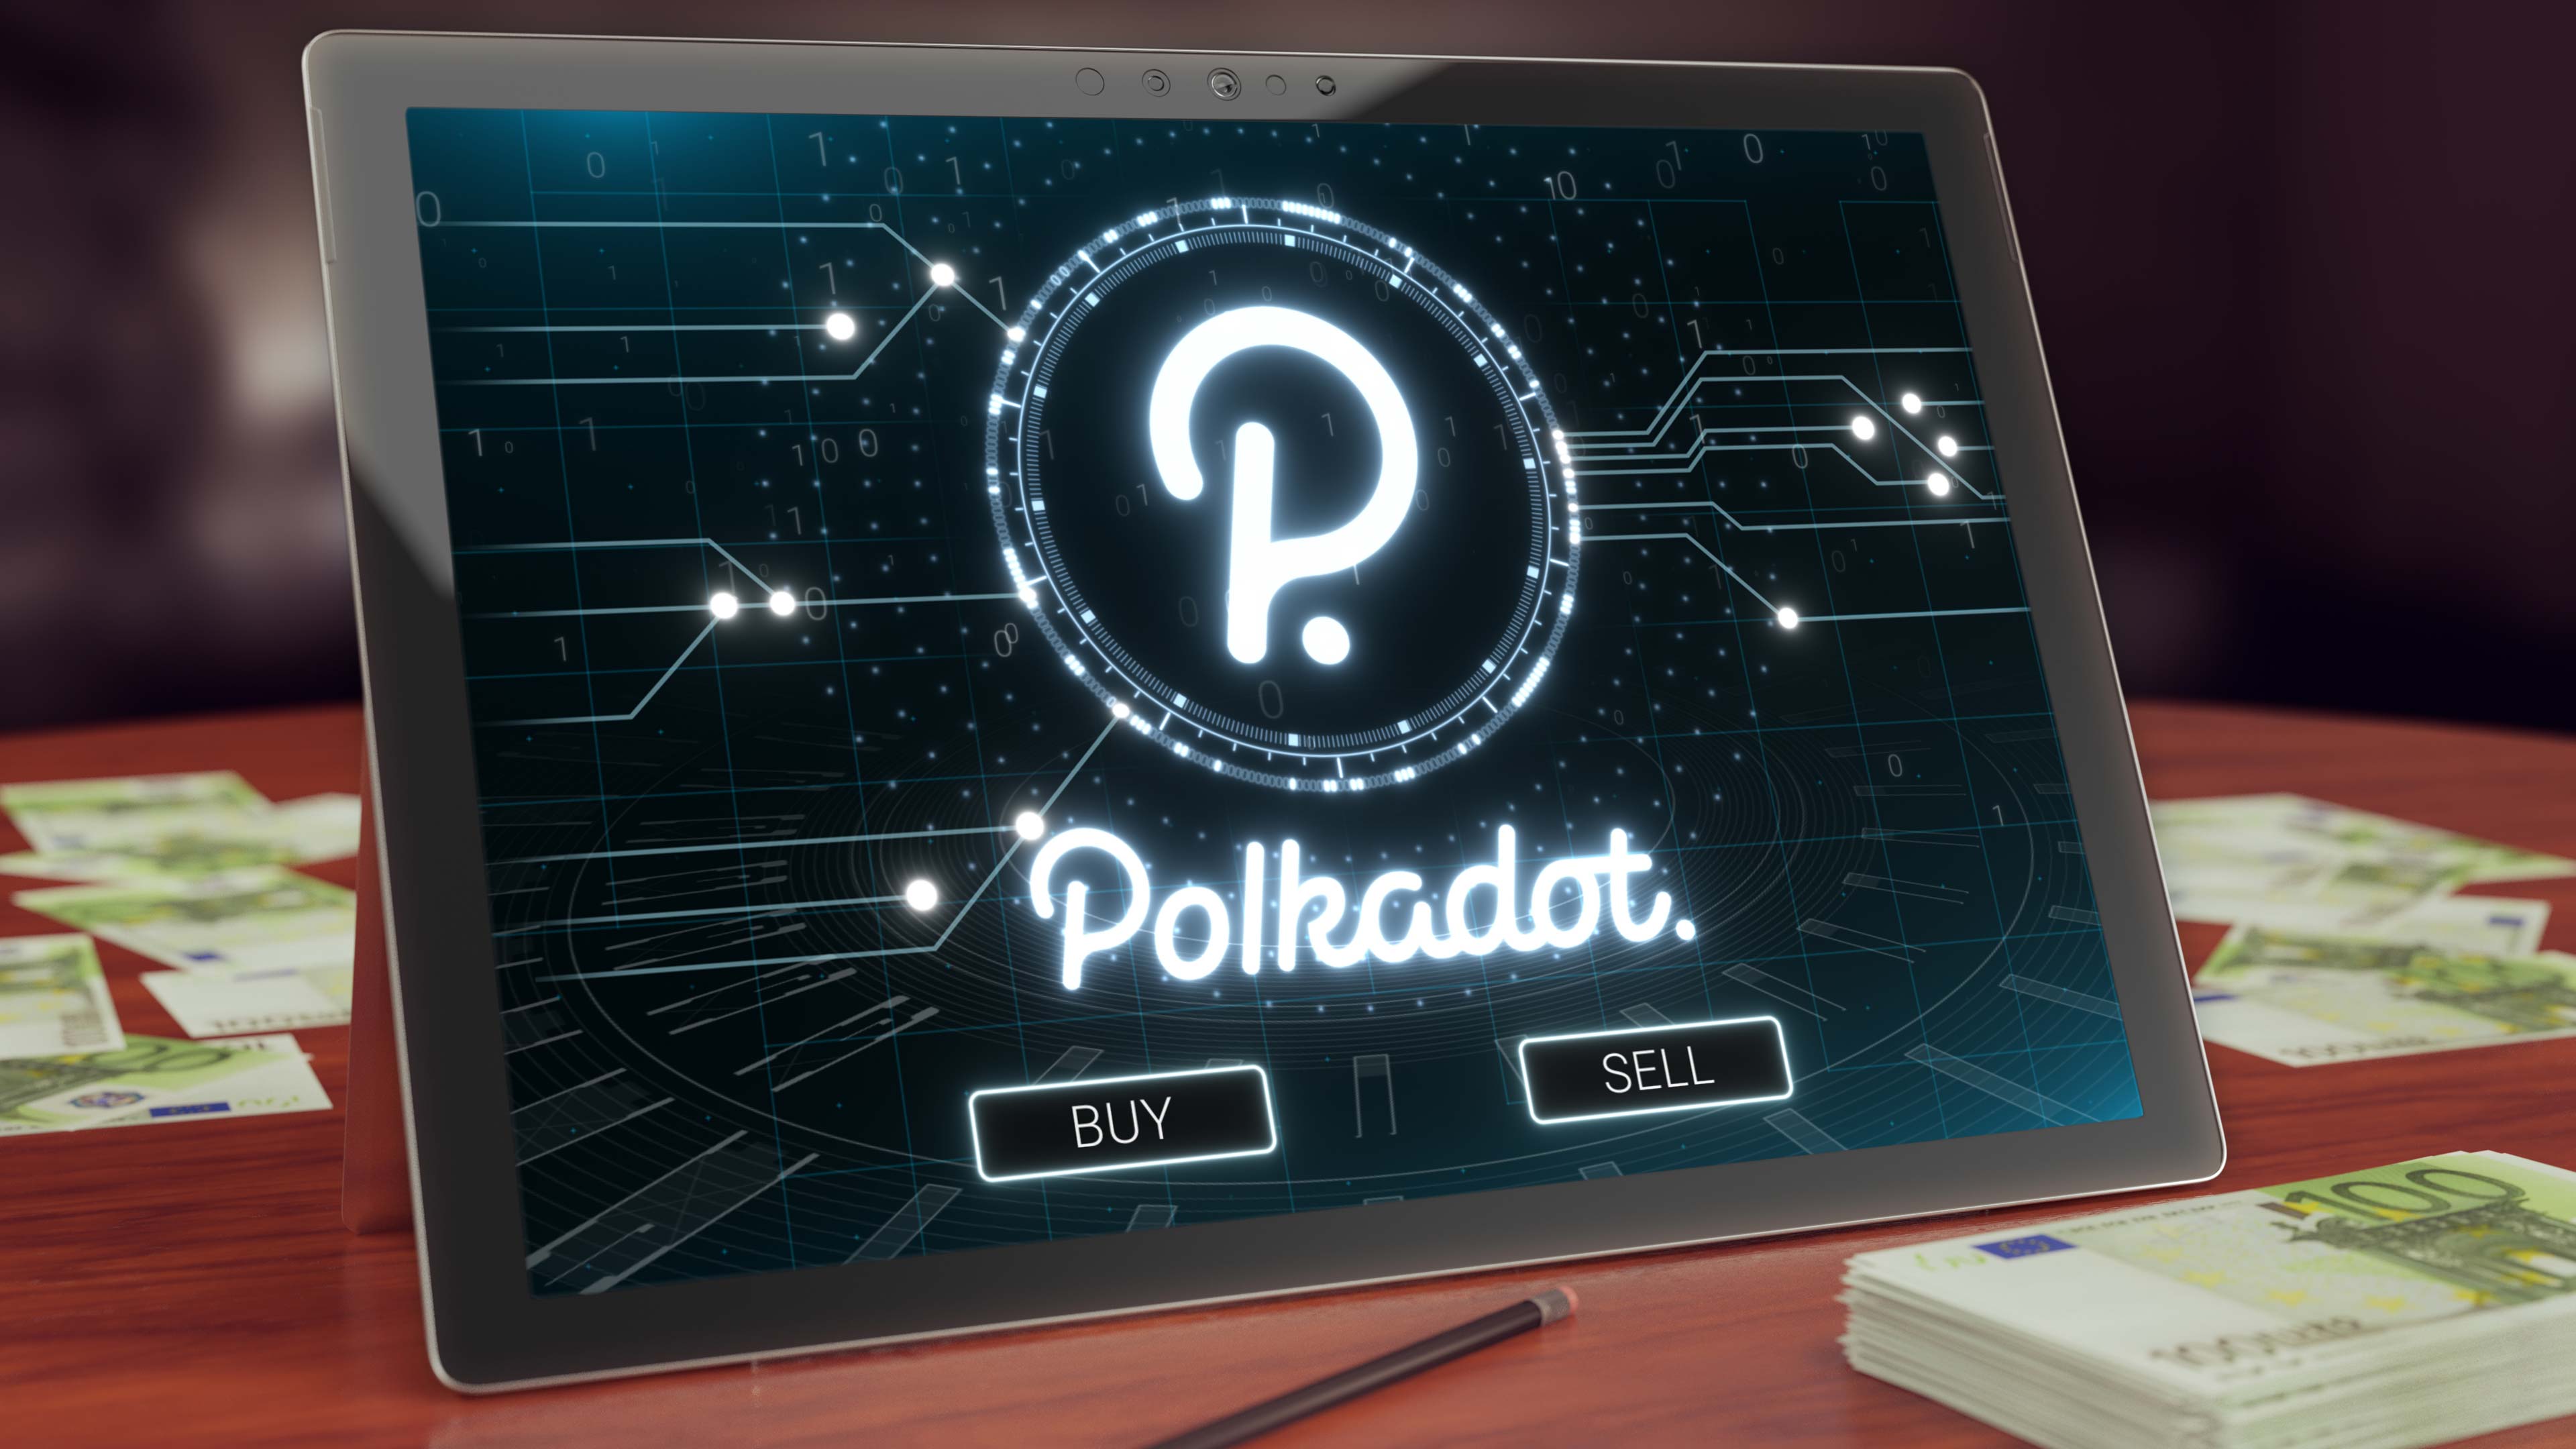 Top cryptocurrency listed — Polkadot